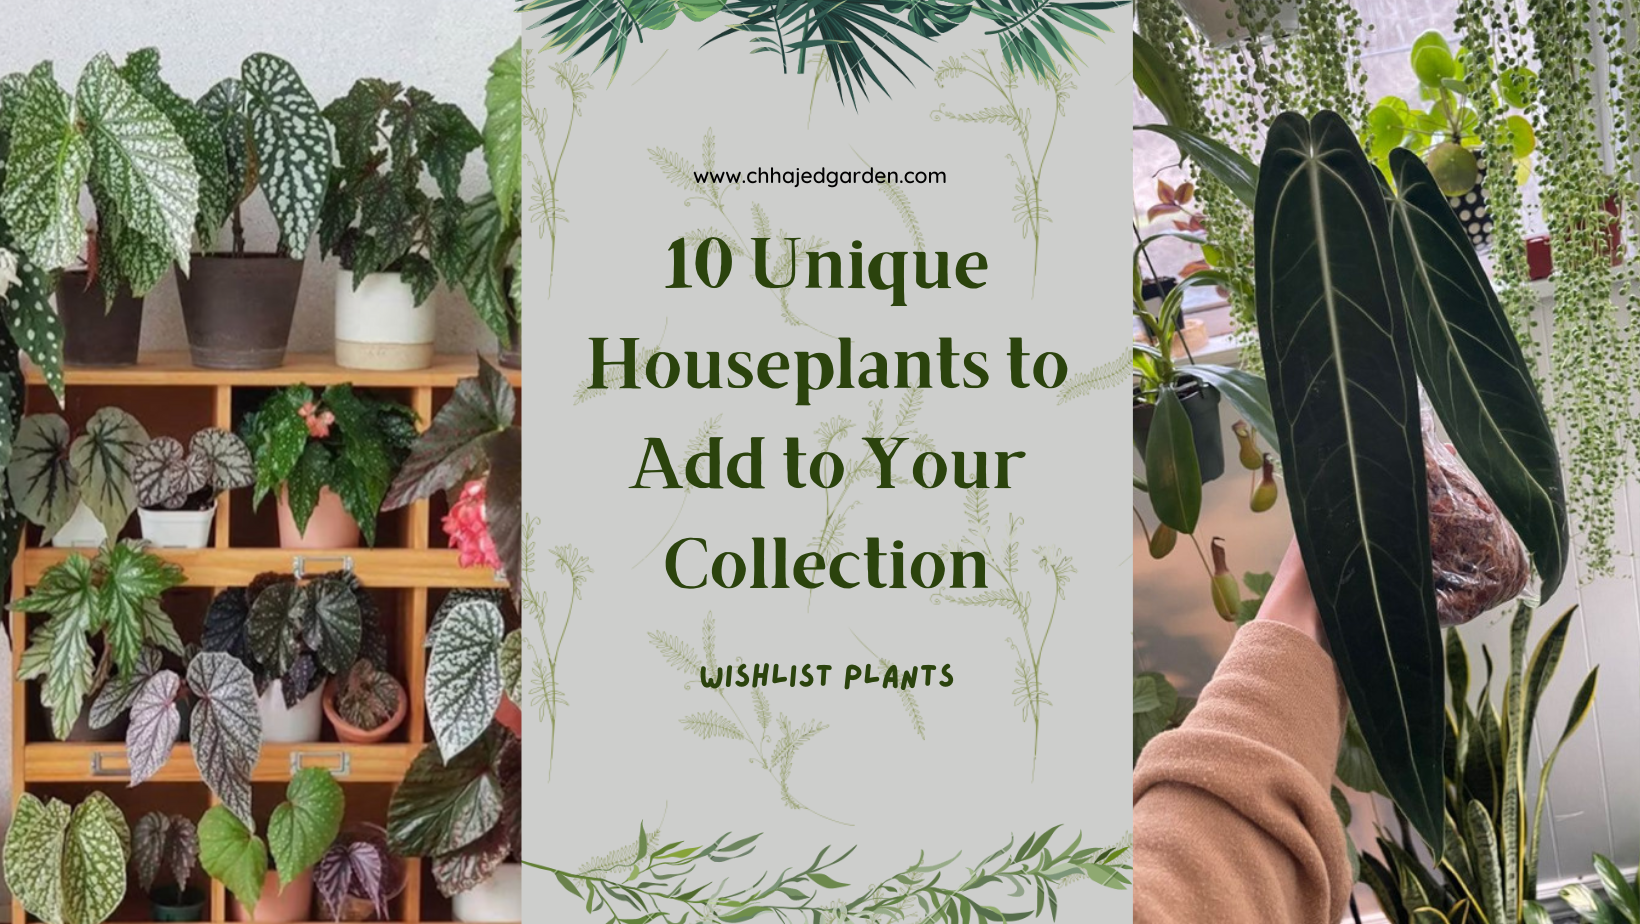 10 Hidden Gem Houseplants to Add to Your Collection